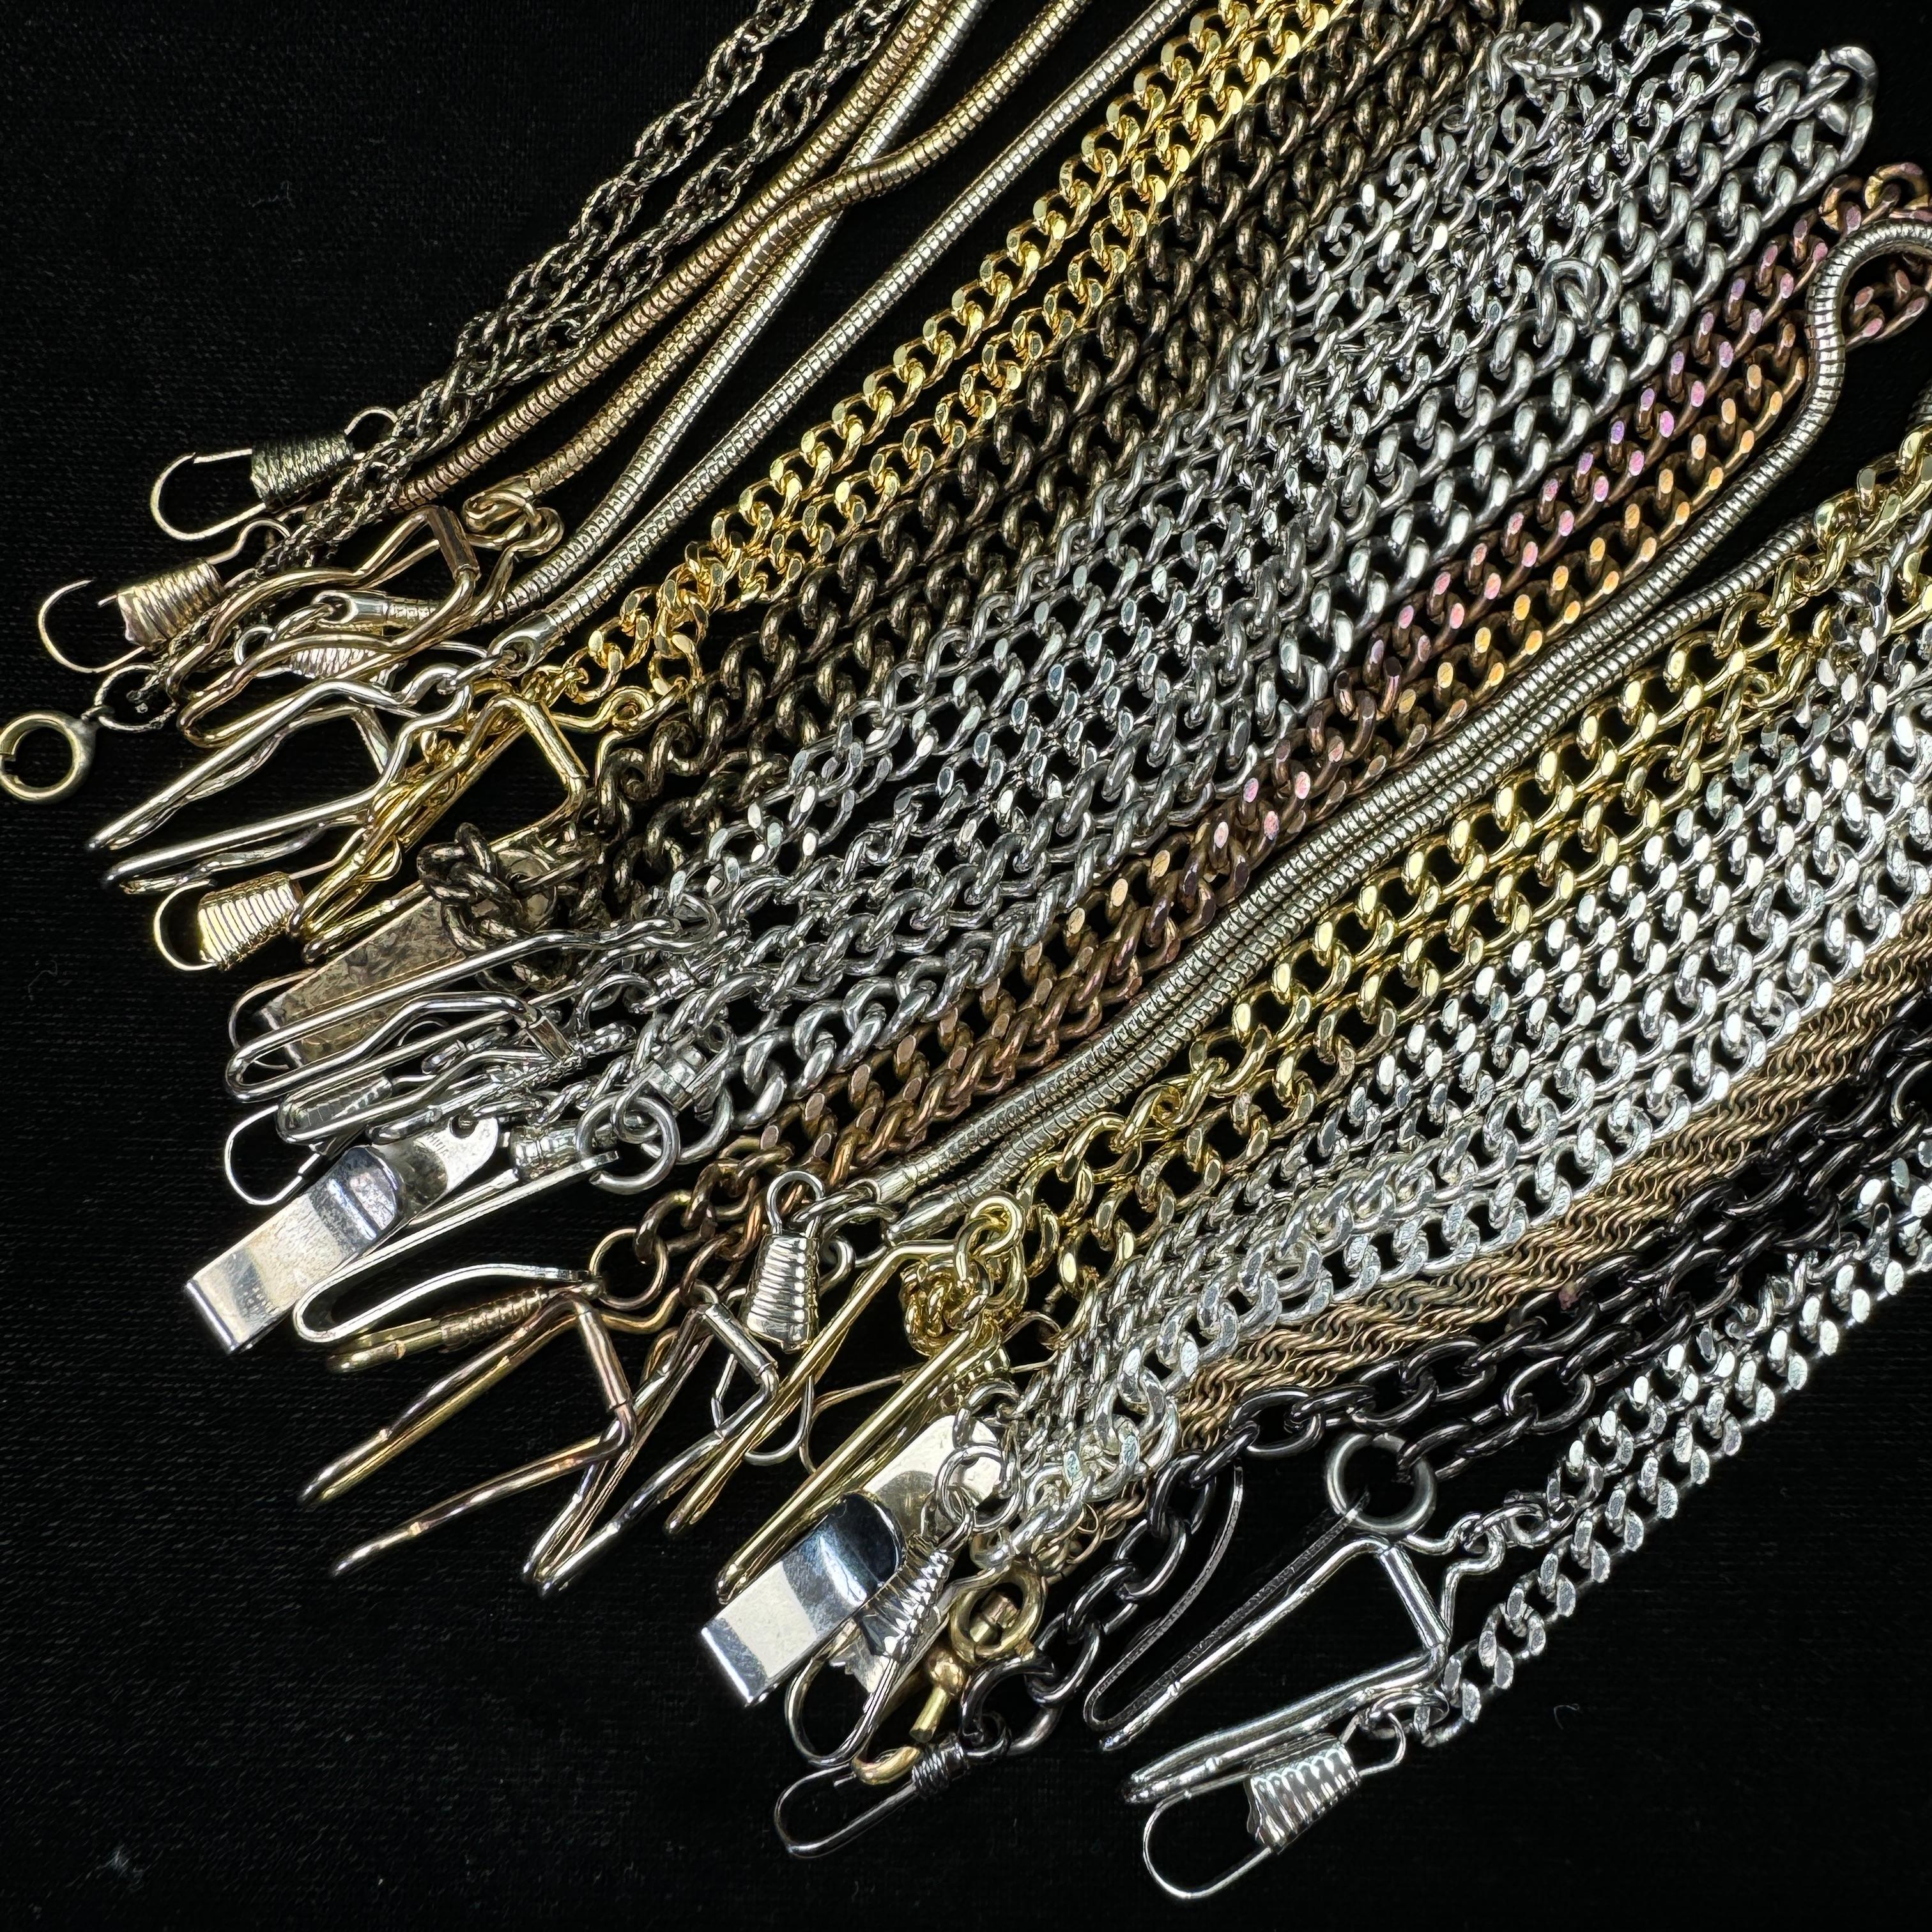 Lot of 6 watch chains